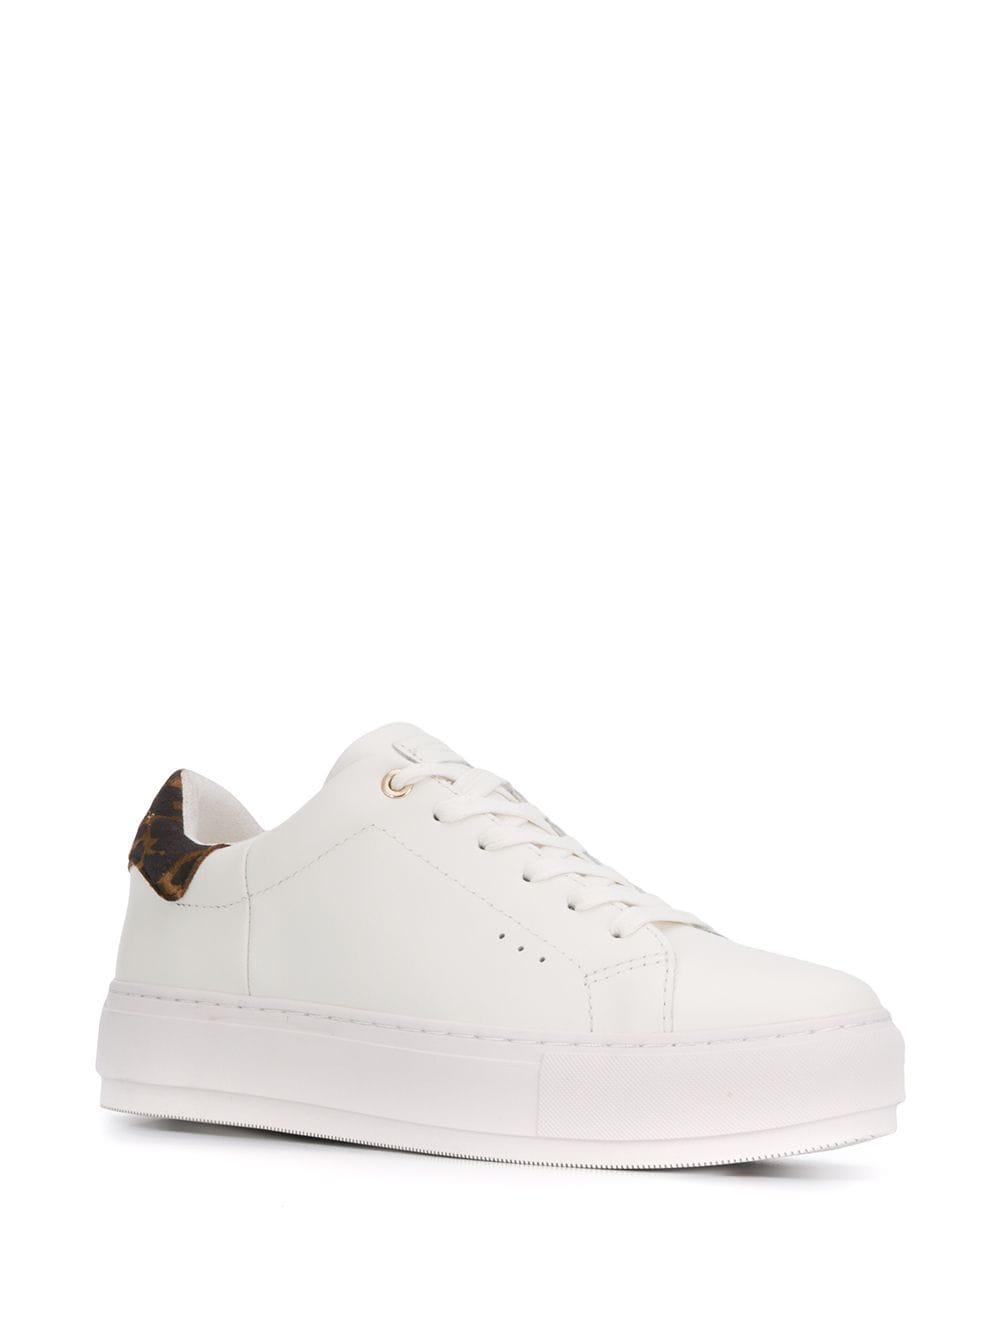 Kurt Geiger Leather Laney Low Top Platform Sneakers in White - Lyst